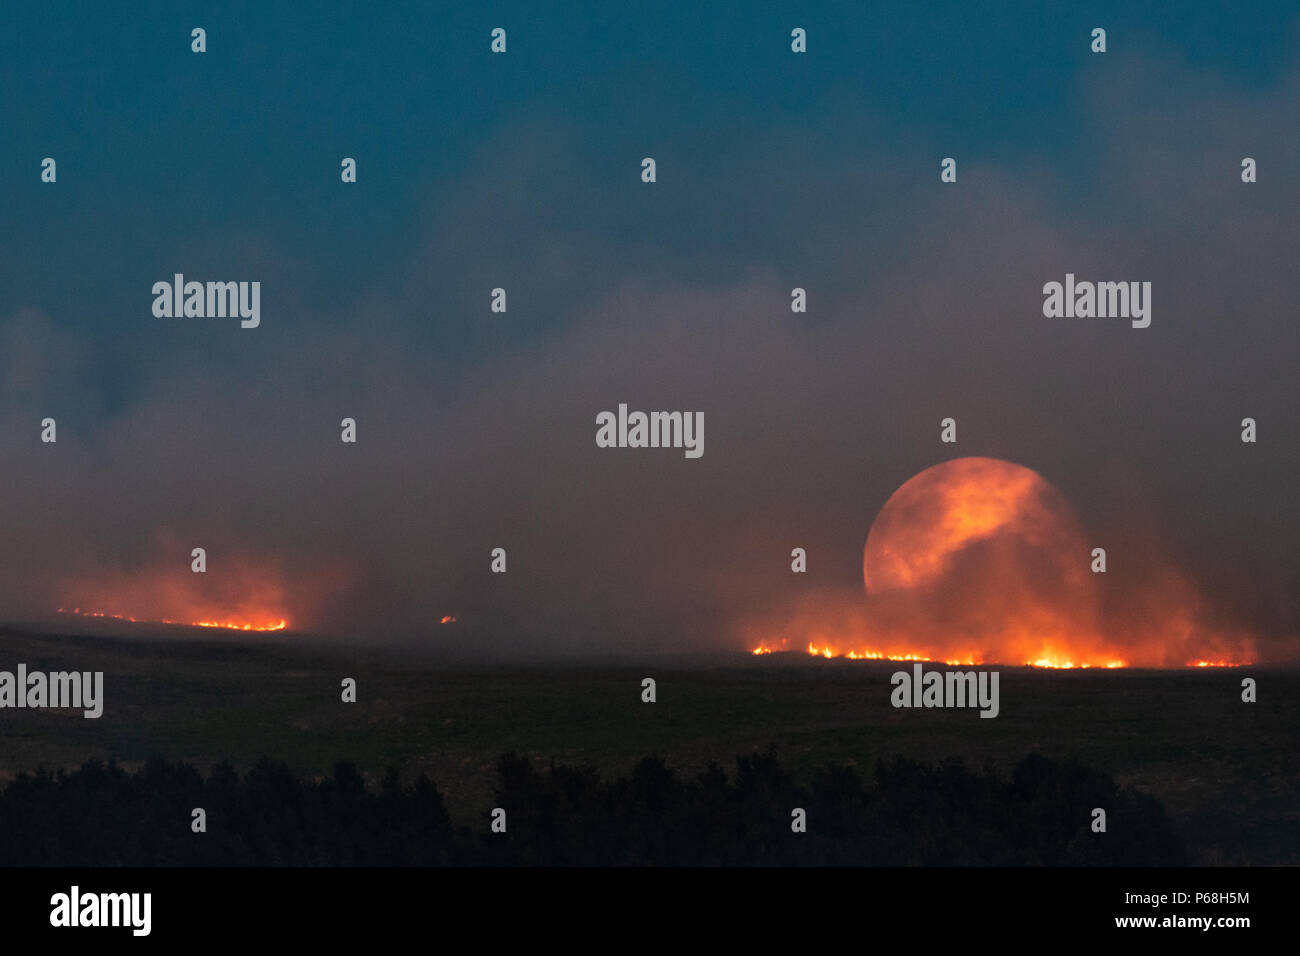 Winter Hill, Greater Manchester, UK. 28th Jun, 2018. The moon rises over a grass fire on the moorlands of Winter Hill, near Bolton in Greater Manchester. Credit: Jason Smalley Photography/Alamy Live News Stock Photo